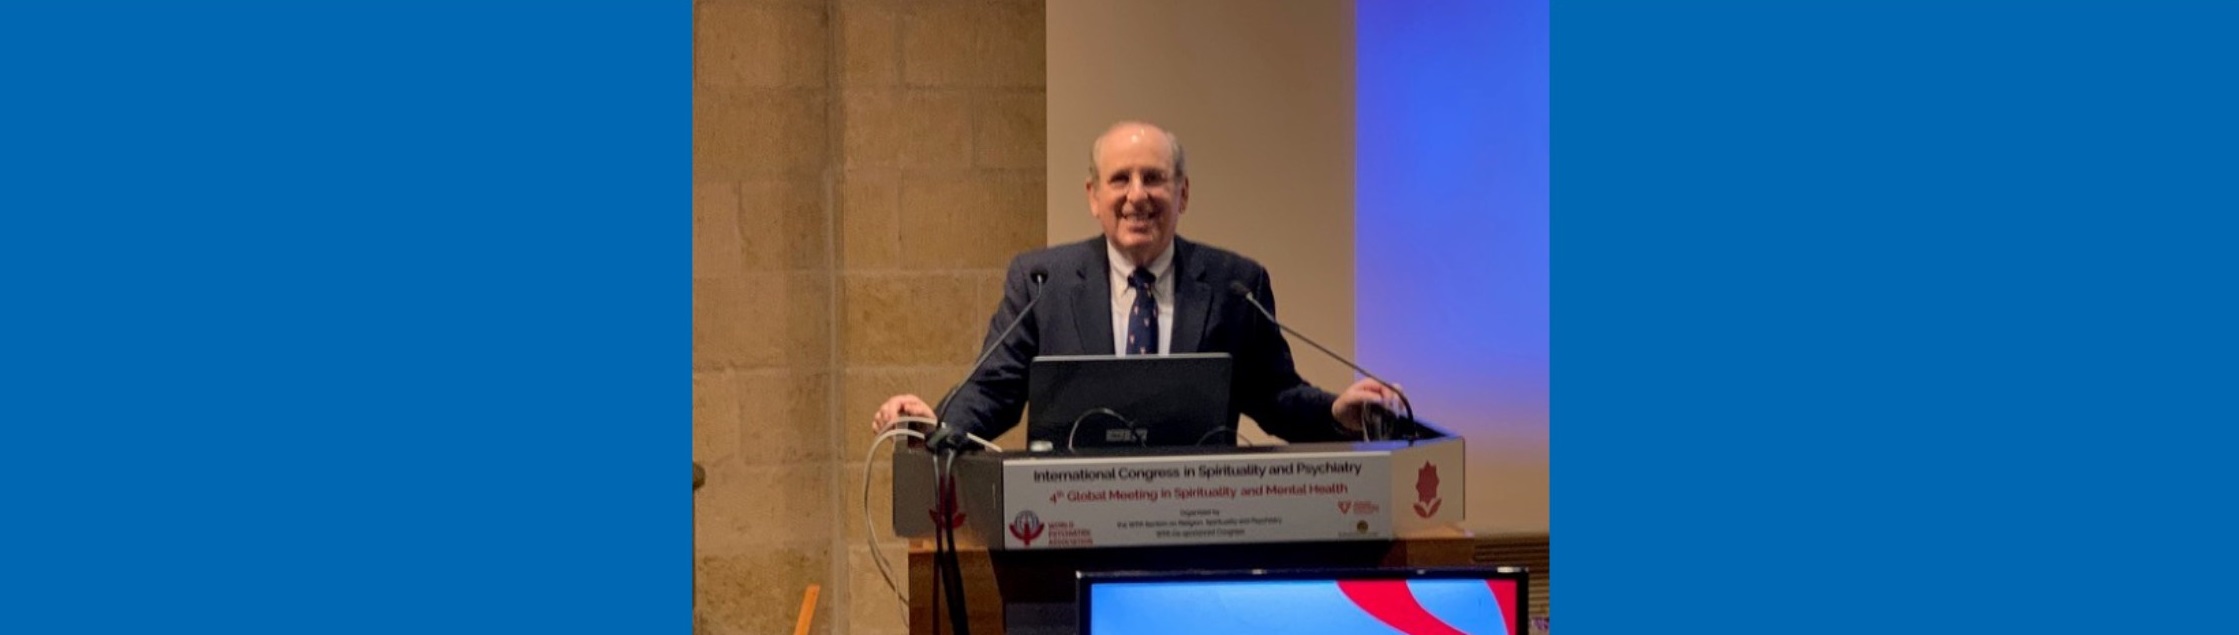 John Fromson, MD, presents at the International Congress in Spirituality and Psychiatry